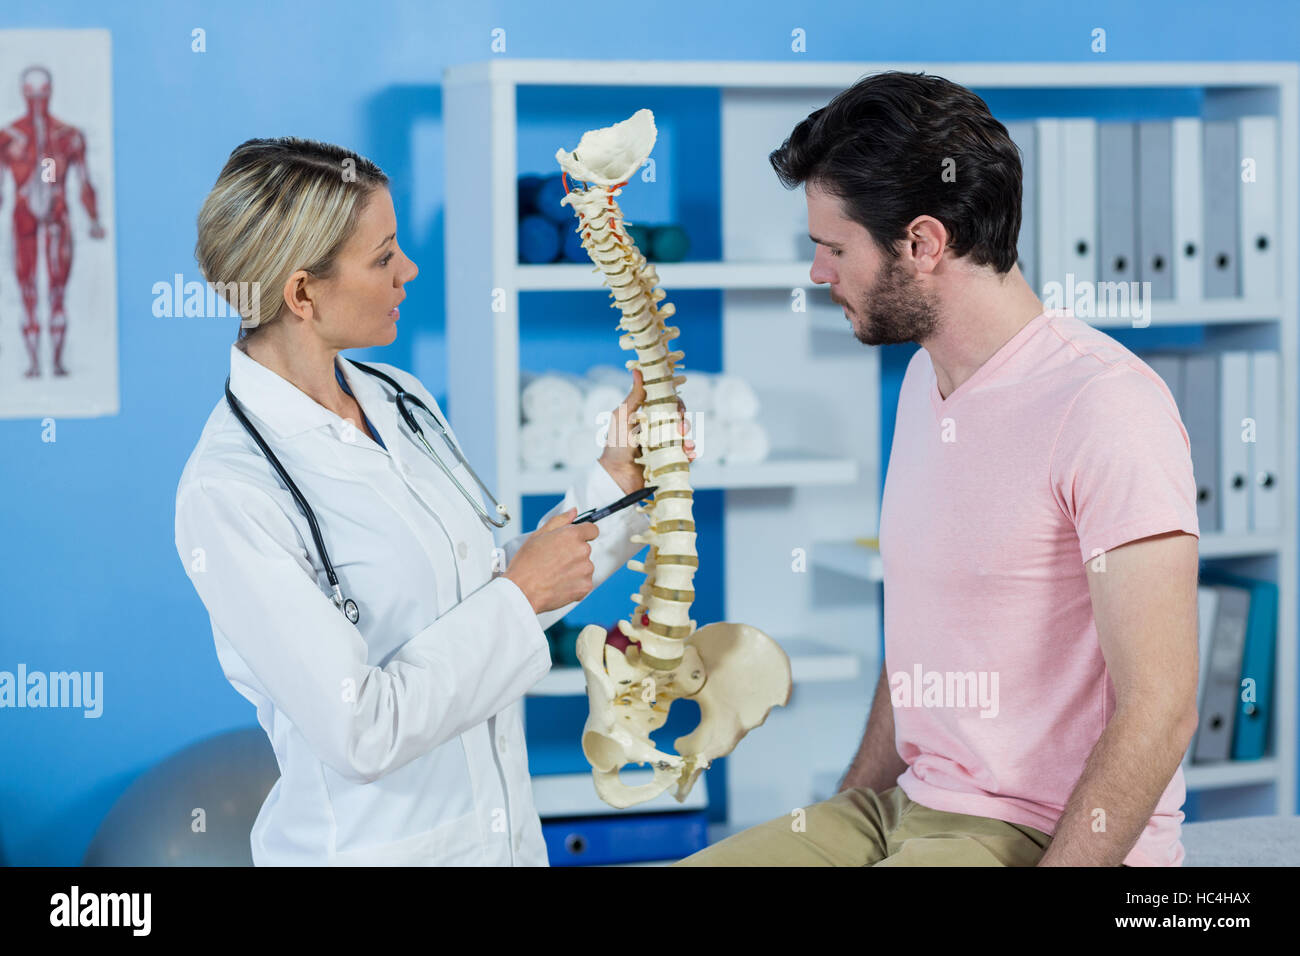 Physiotherapist explaining the spine model to patient Stock Photo